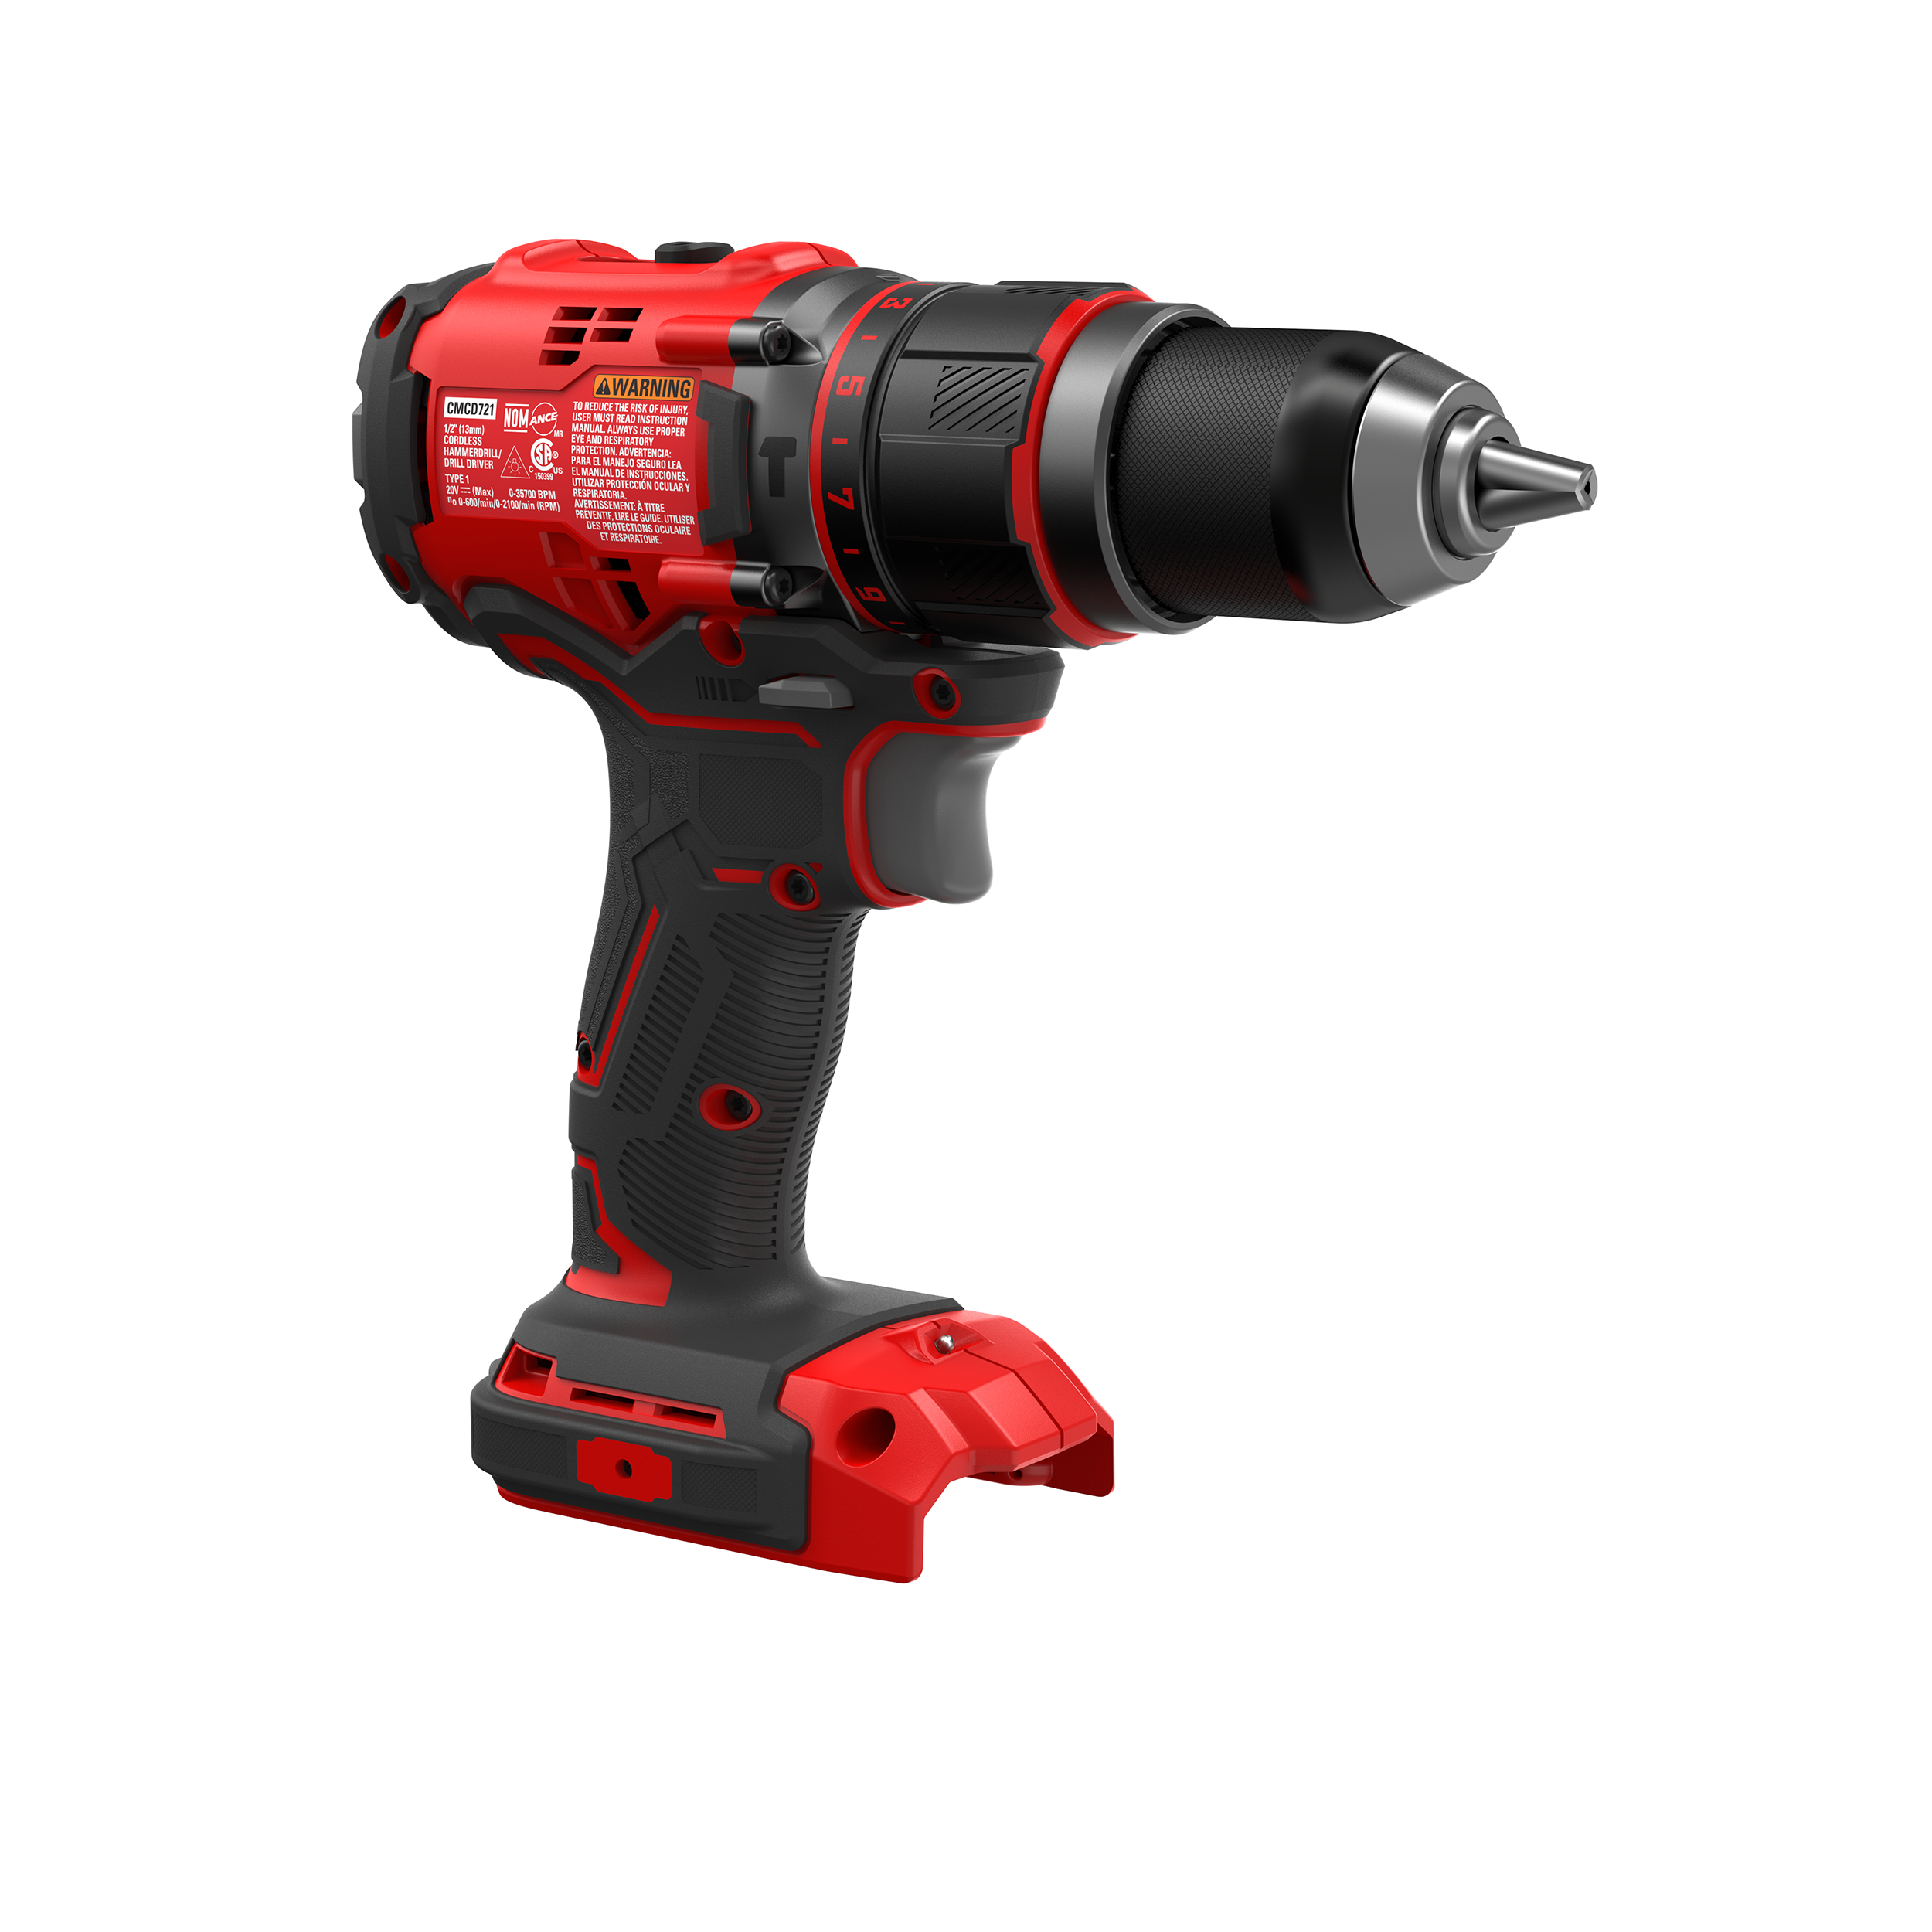 V20* Cordless Brushless 1/2-in Hammerdrill (Tool Only) | CRAFTSMAN